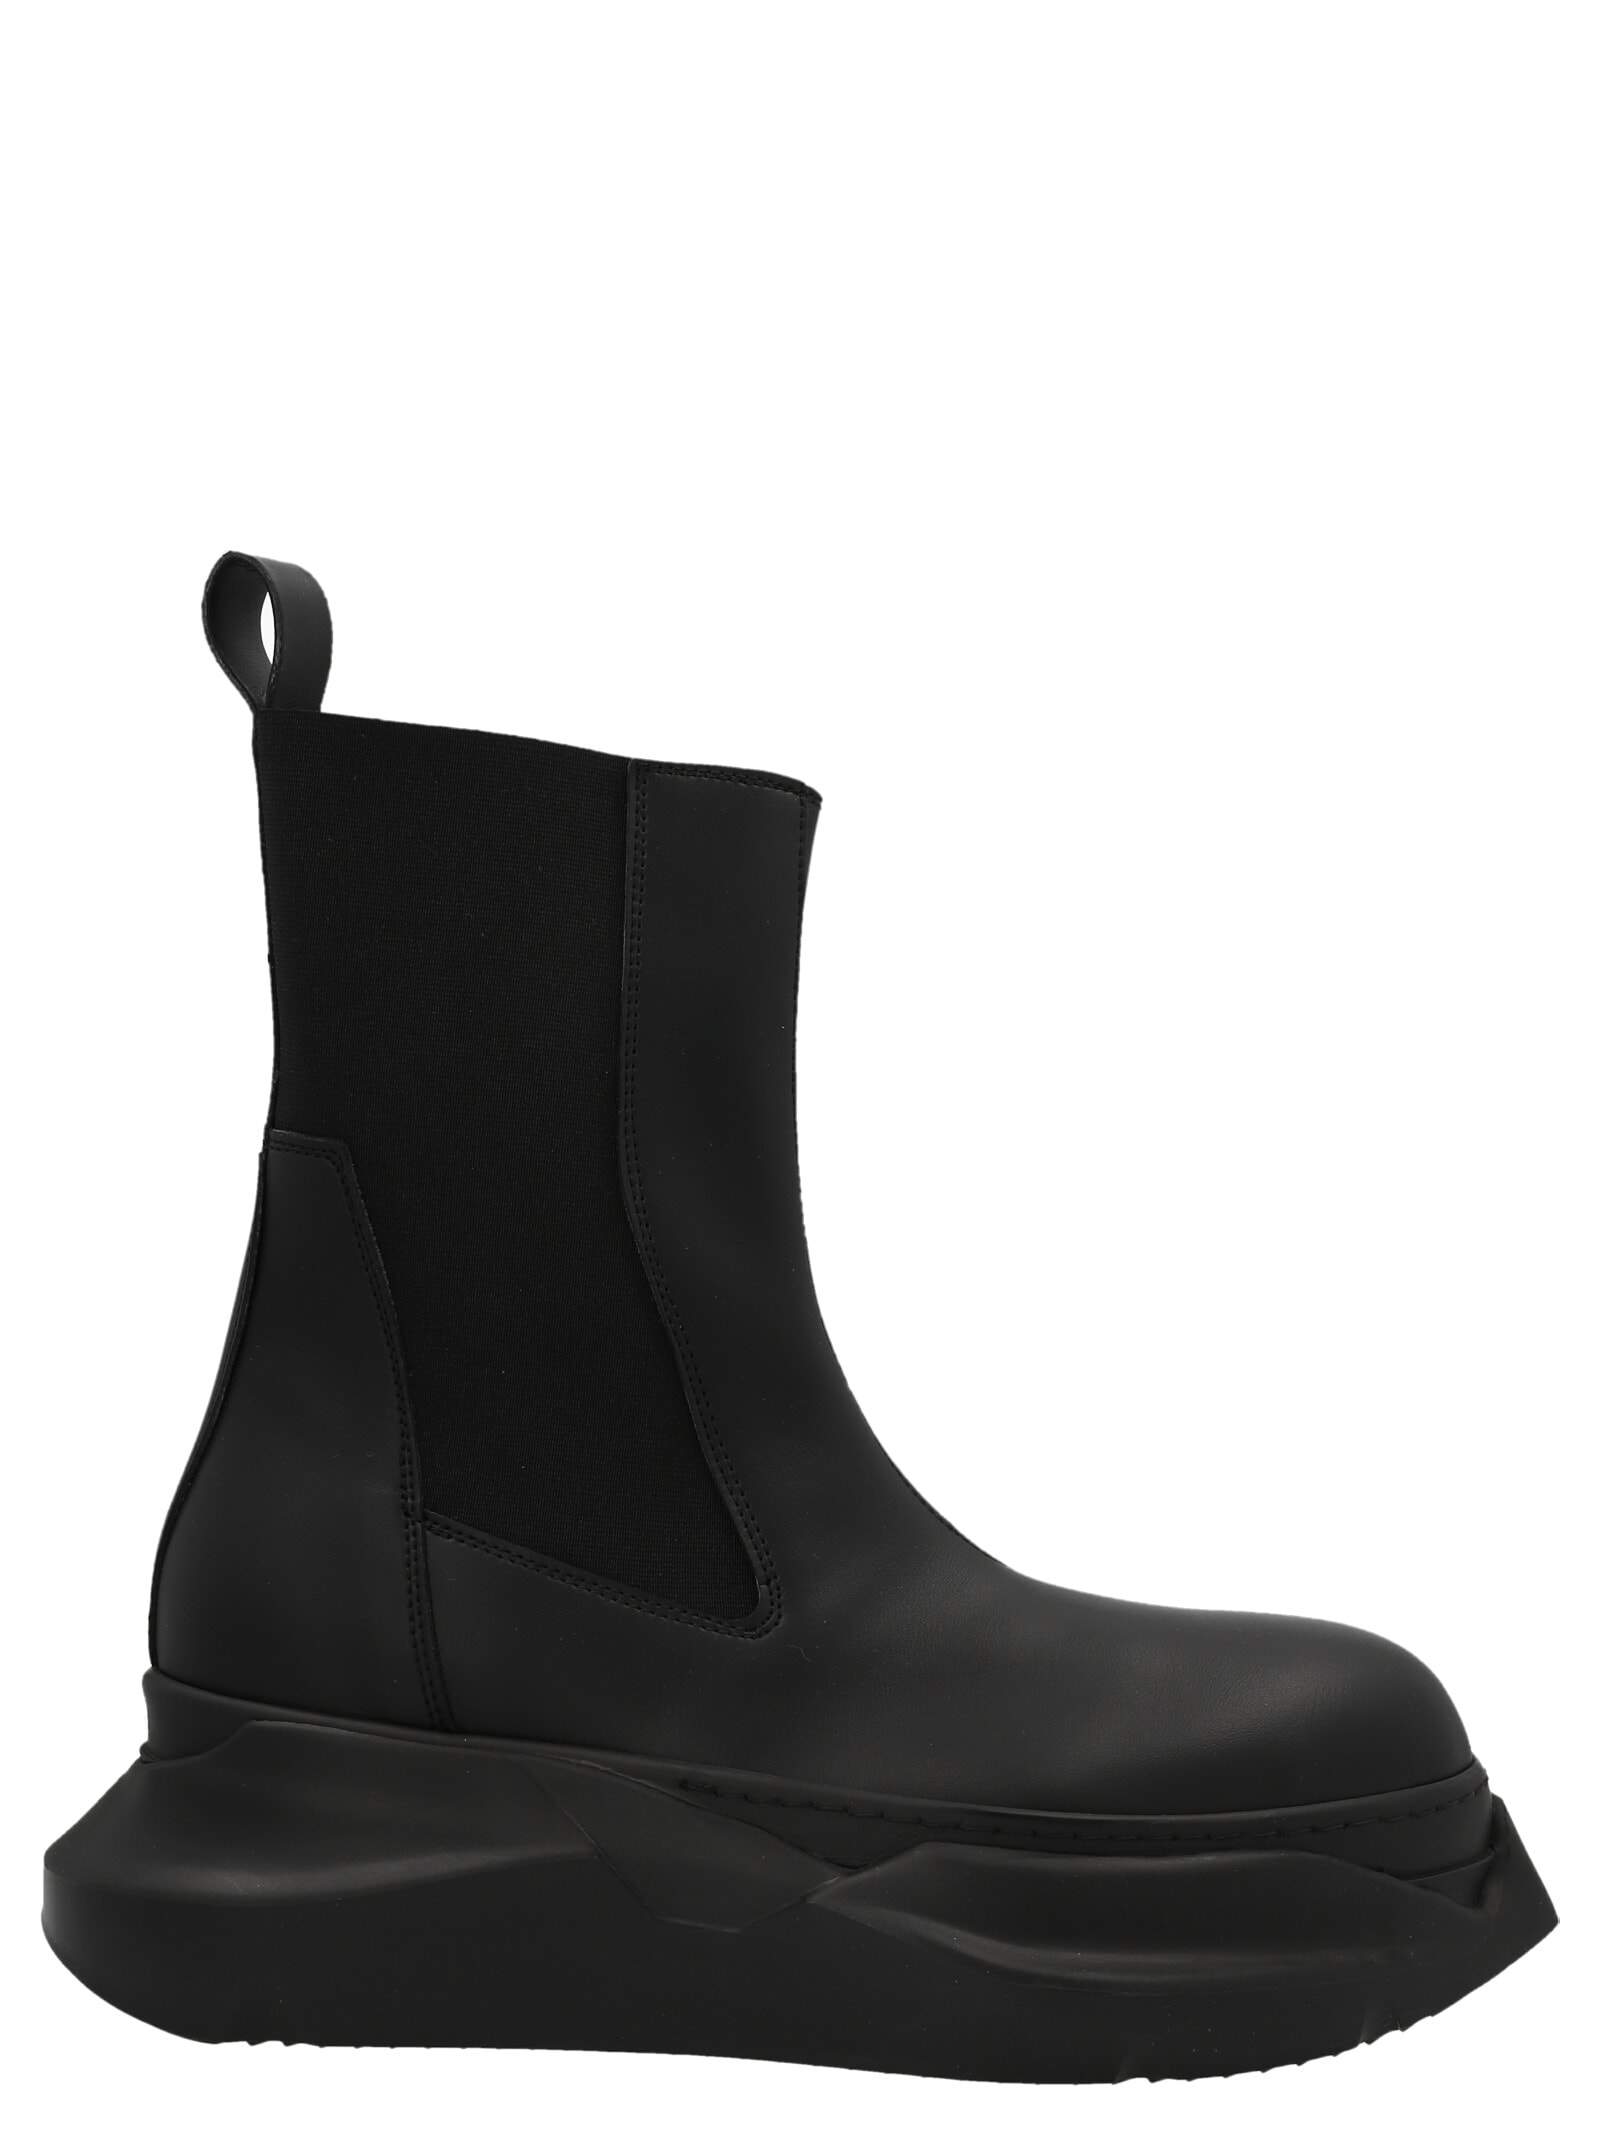 DRKSHDW beatle Abstract Boots